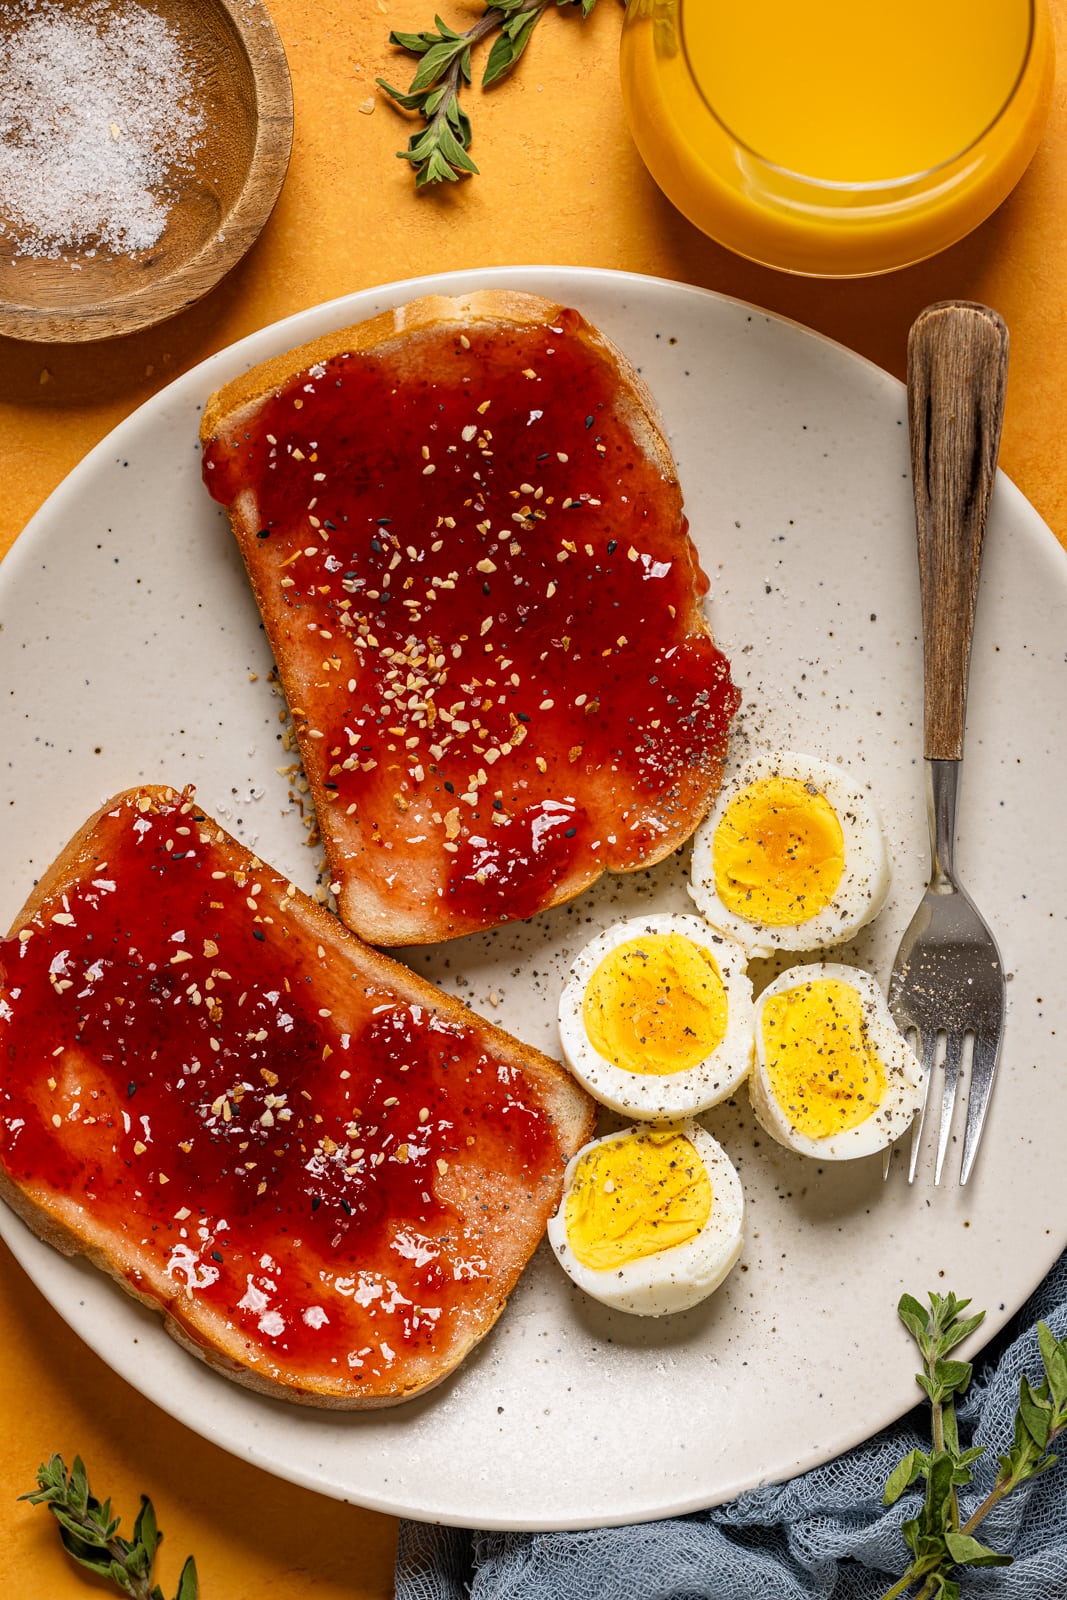 Eggs with jam toast on a plate with a fork and drink.